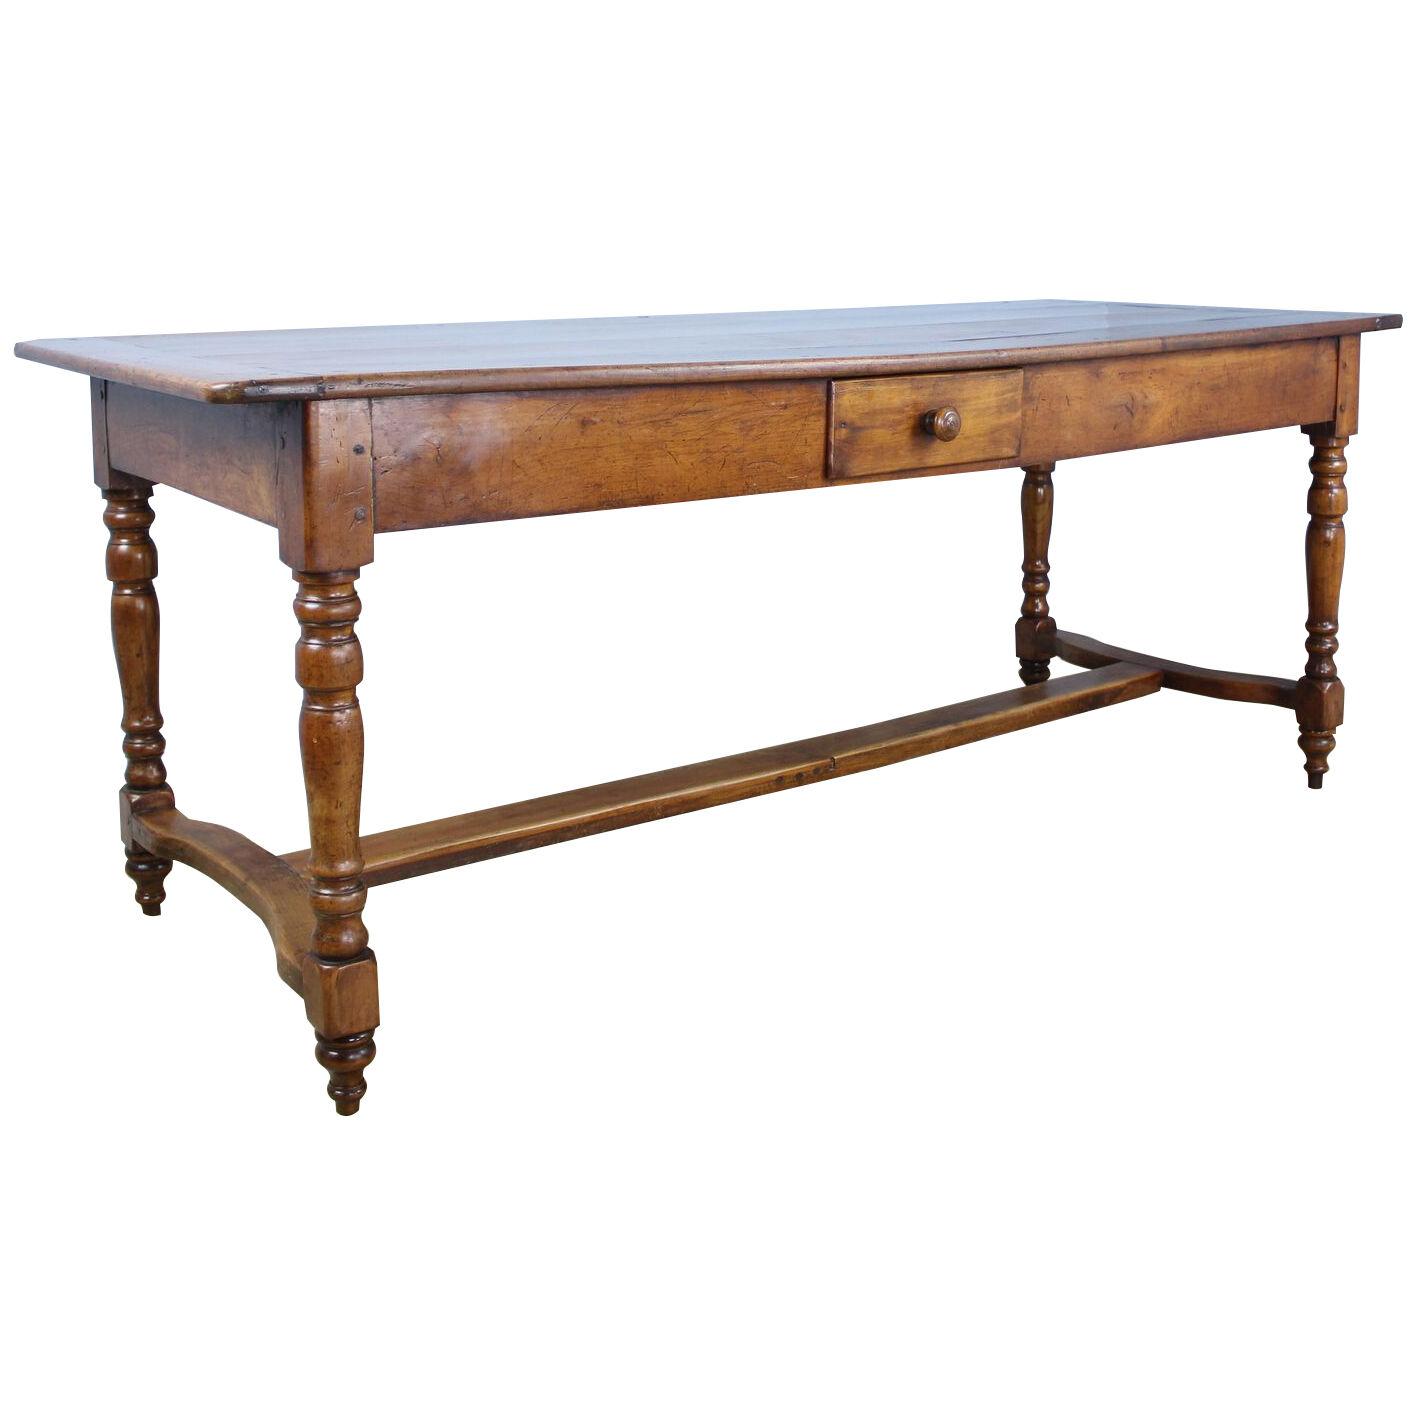 Early 19th Century Farm Table with Turned Legs and Stretcher Base